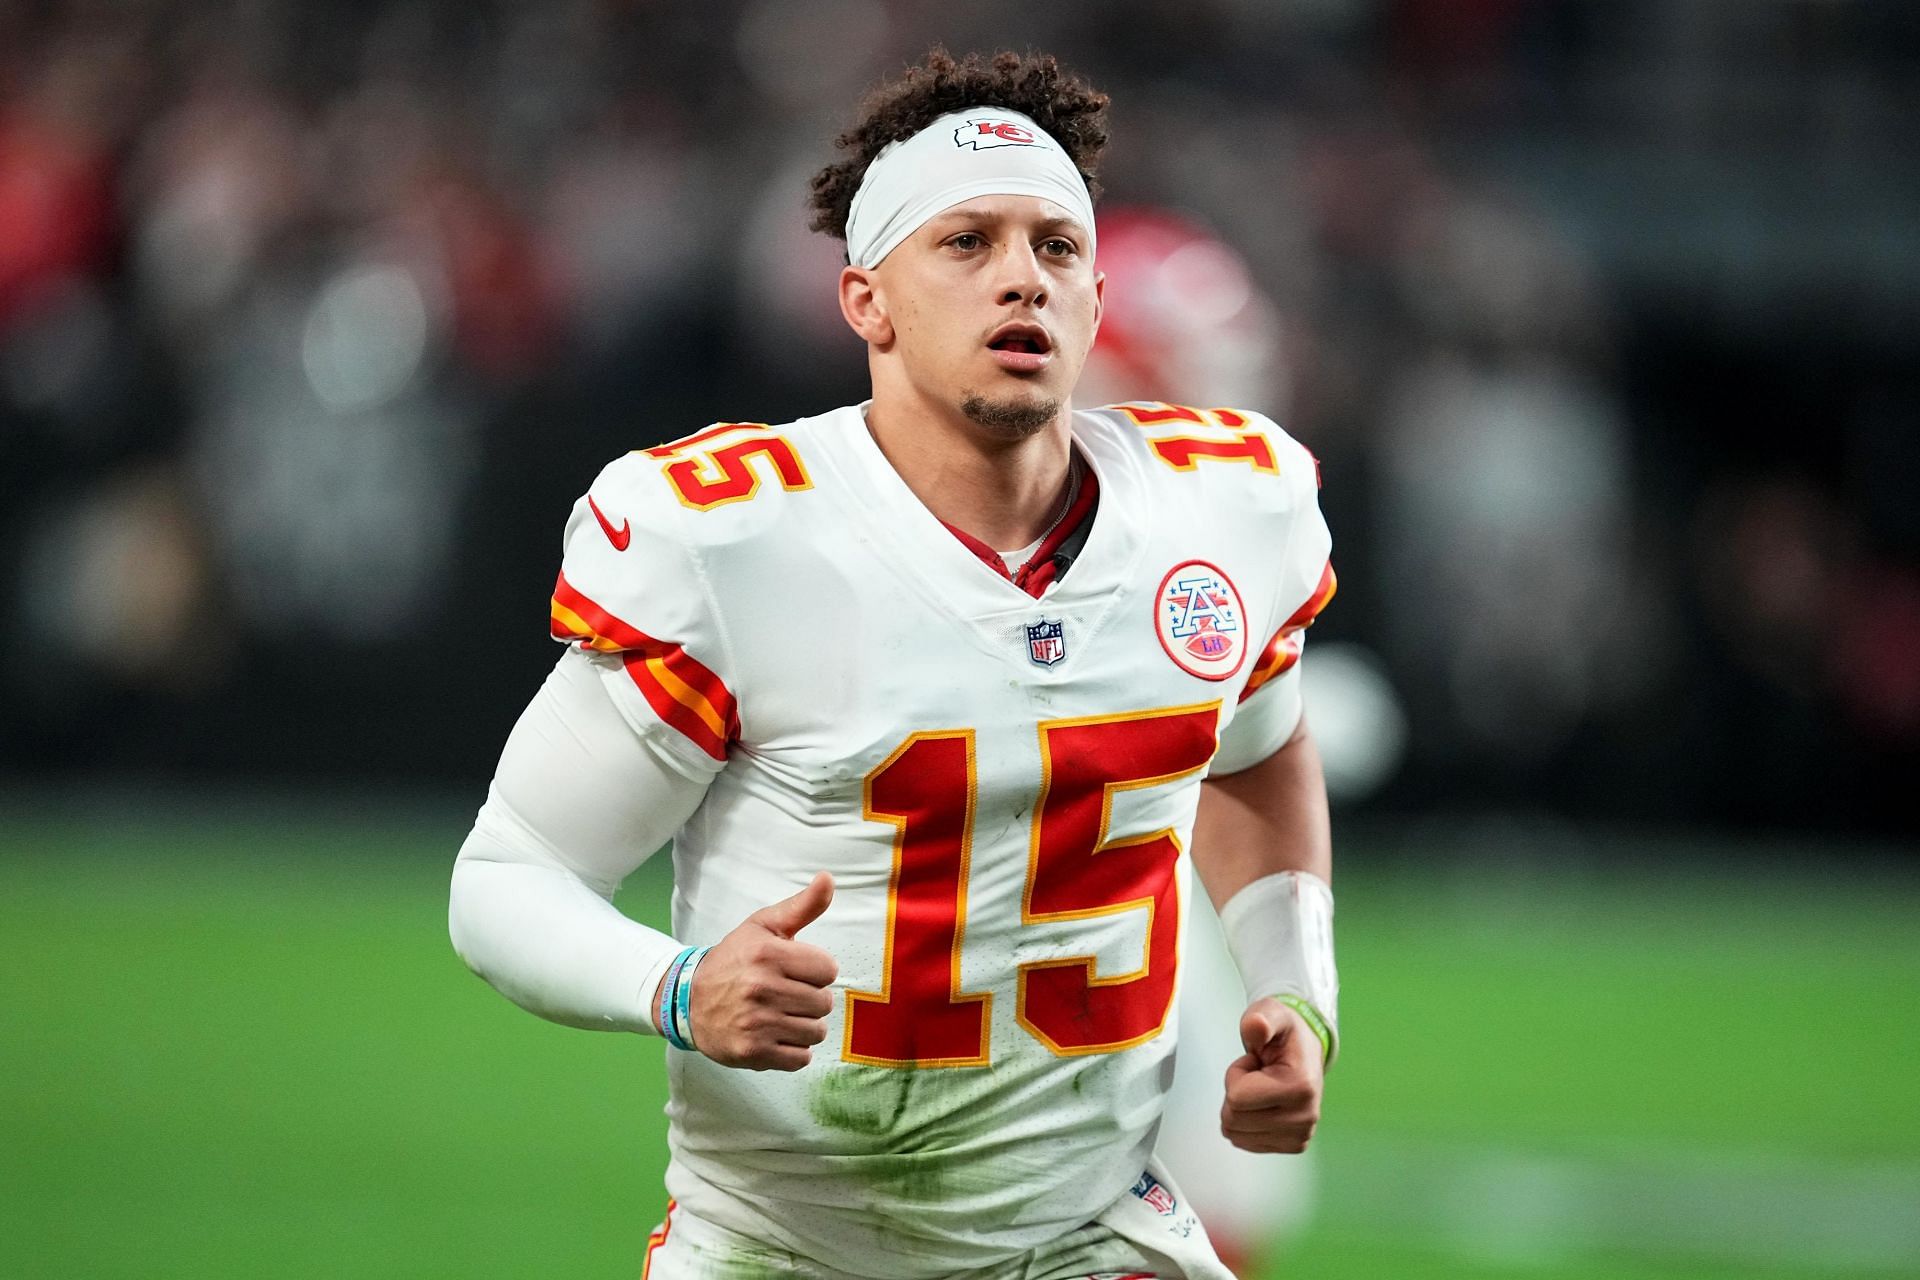 Patrick Mahomes will lead the Kansas City Chiefs when they play the Philadelphia Eagles at the 2023 Super Bowl